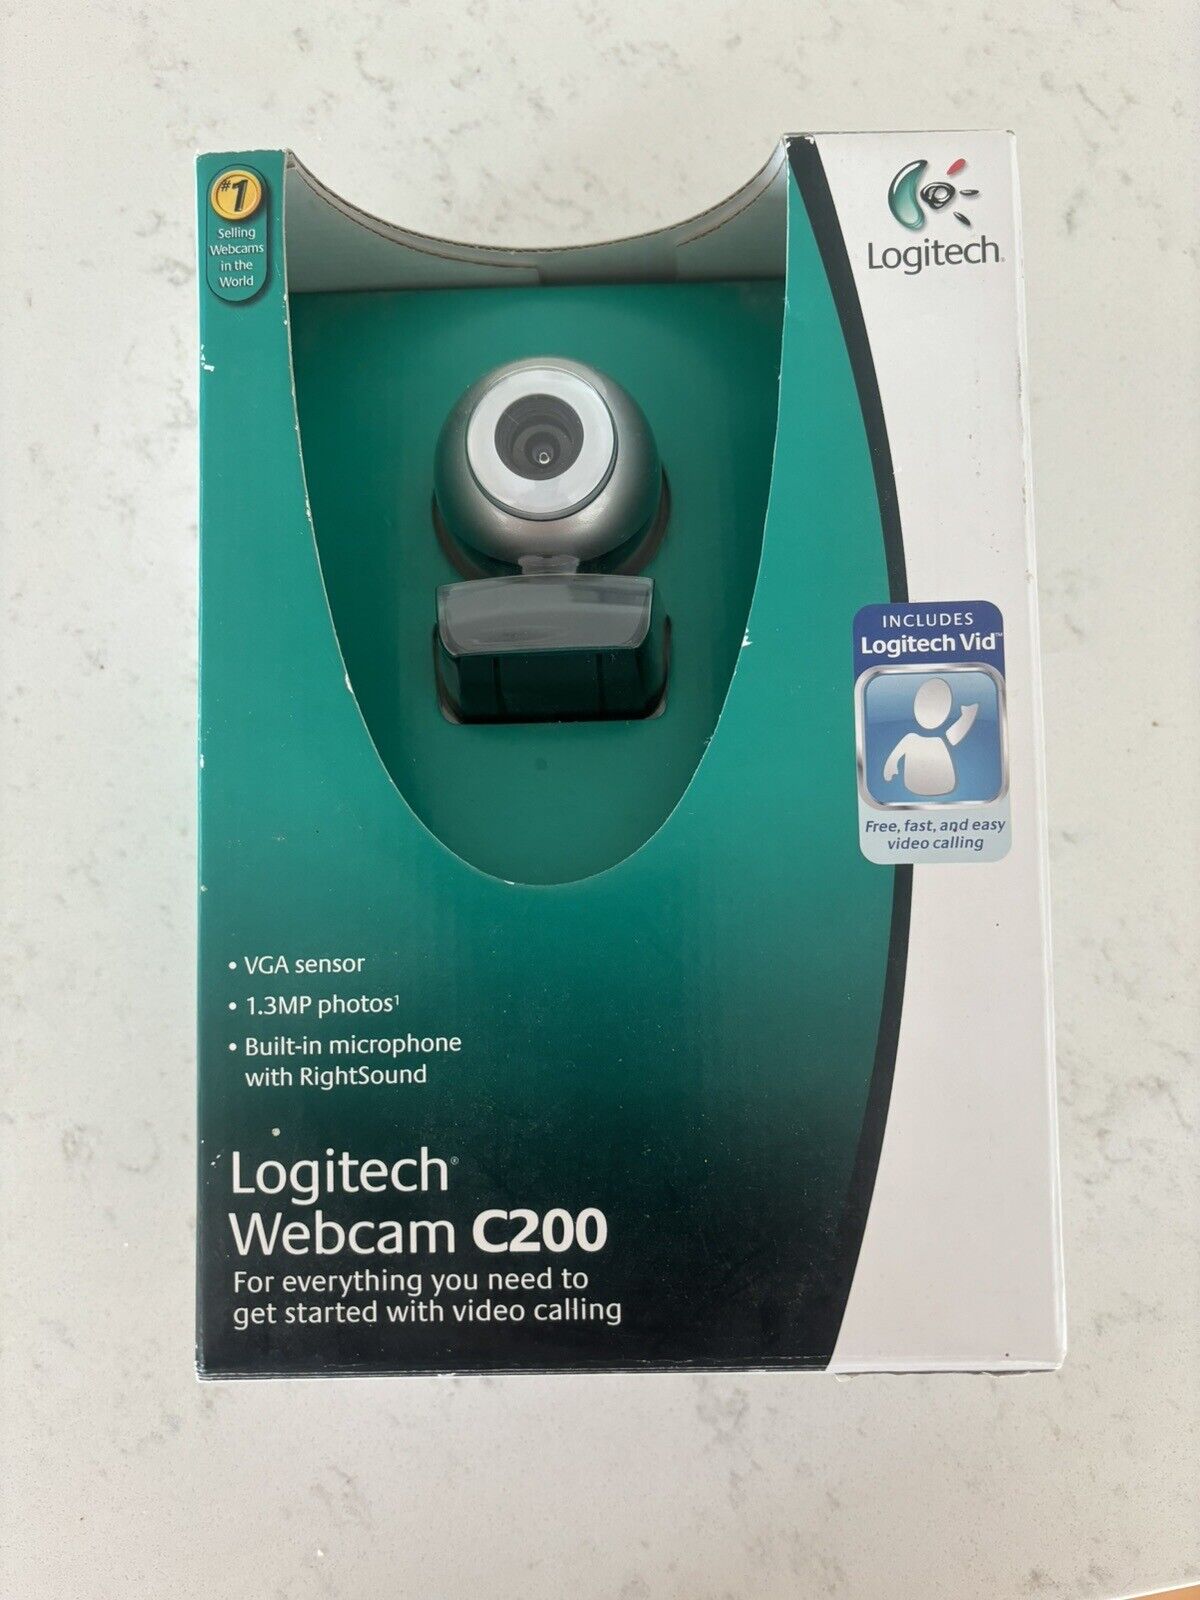 Logitech Webcam C200 Opened Box But Never Used Original Box And Manual/Software